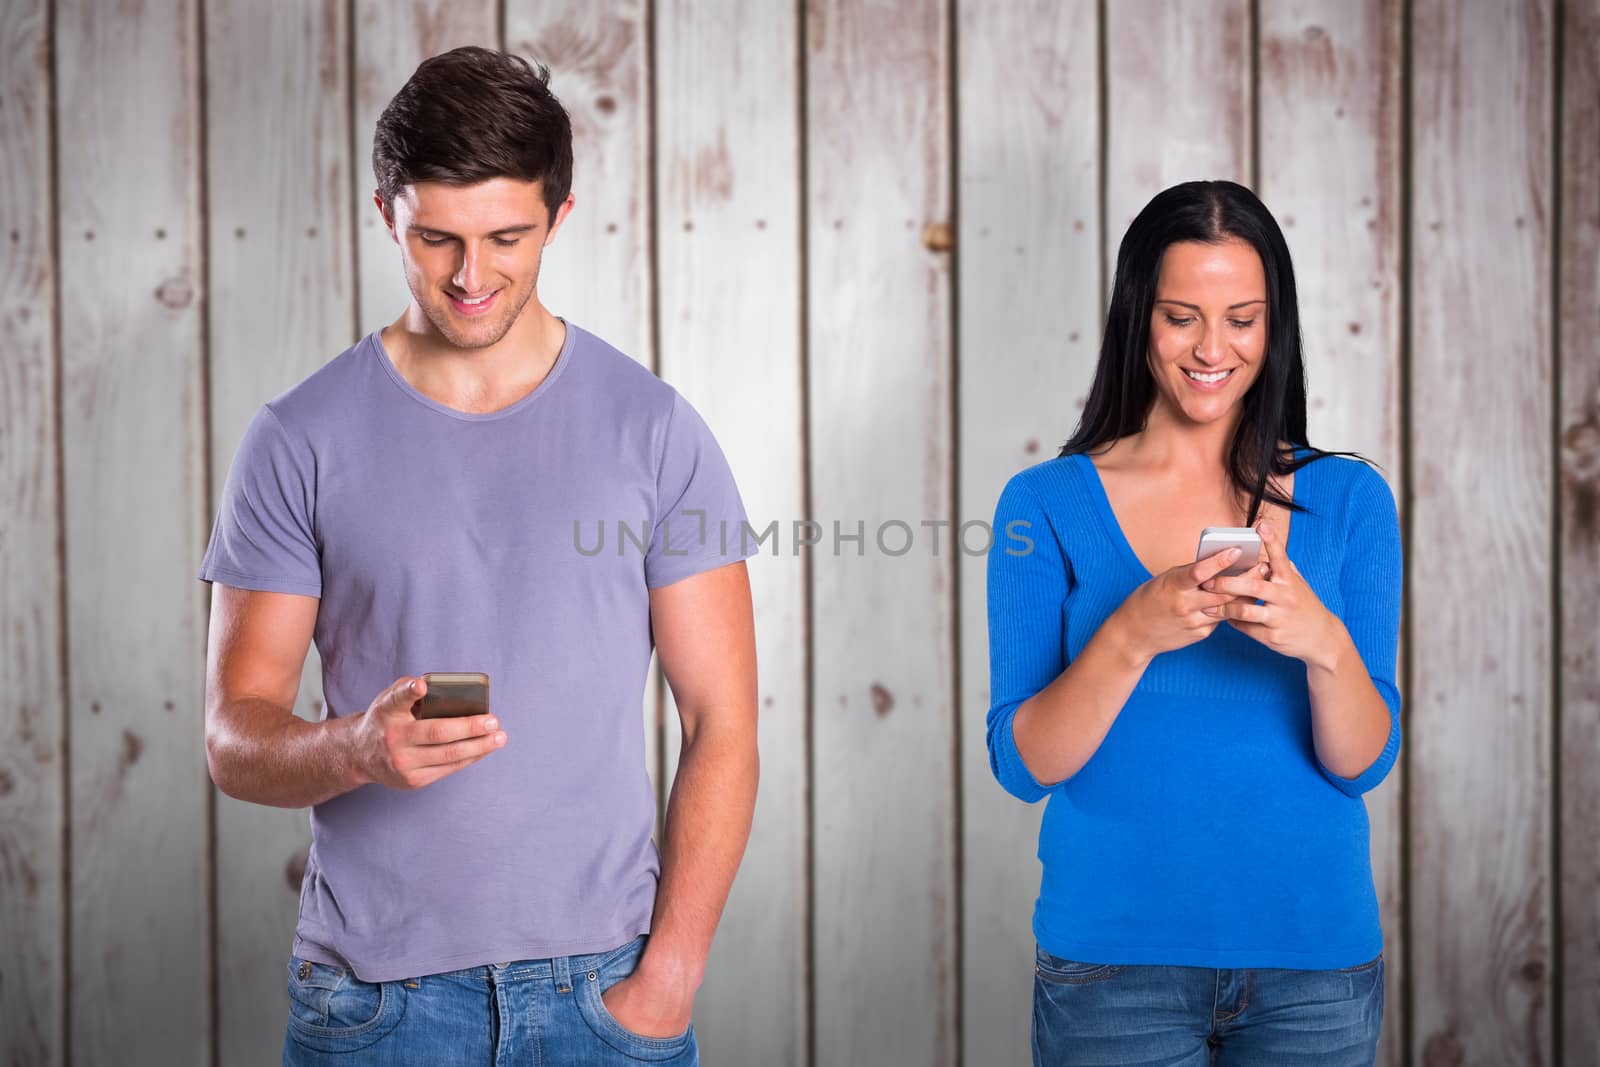 Young couple sending a text against wooden planks